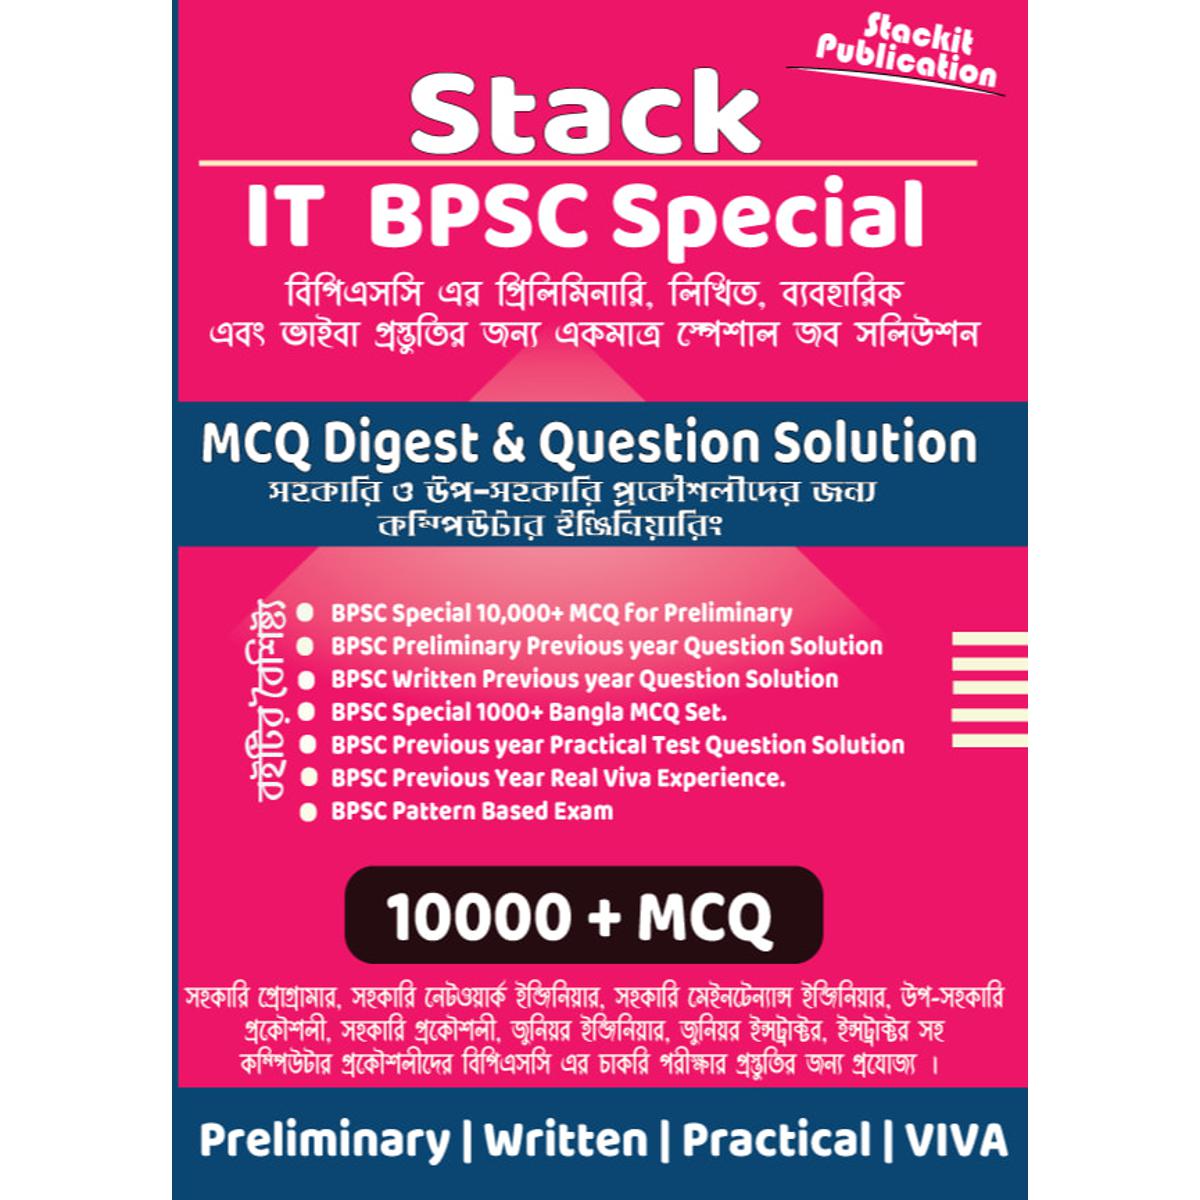 Stack It BPSC Special MCQ Digest & Question Solution +3pc Marks